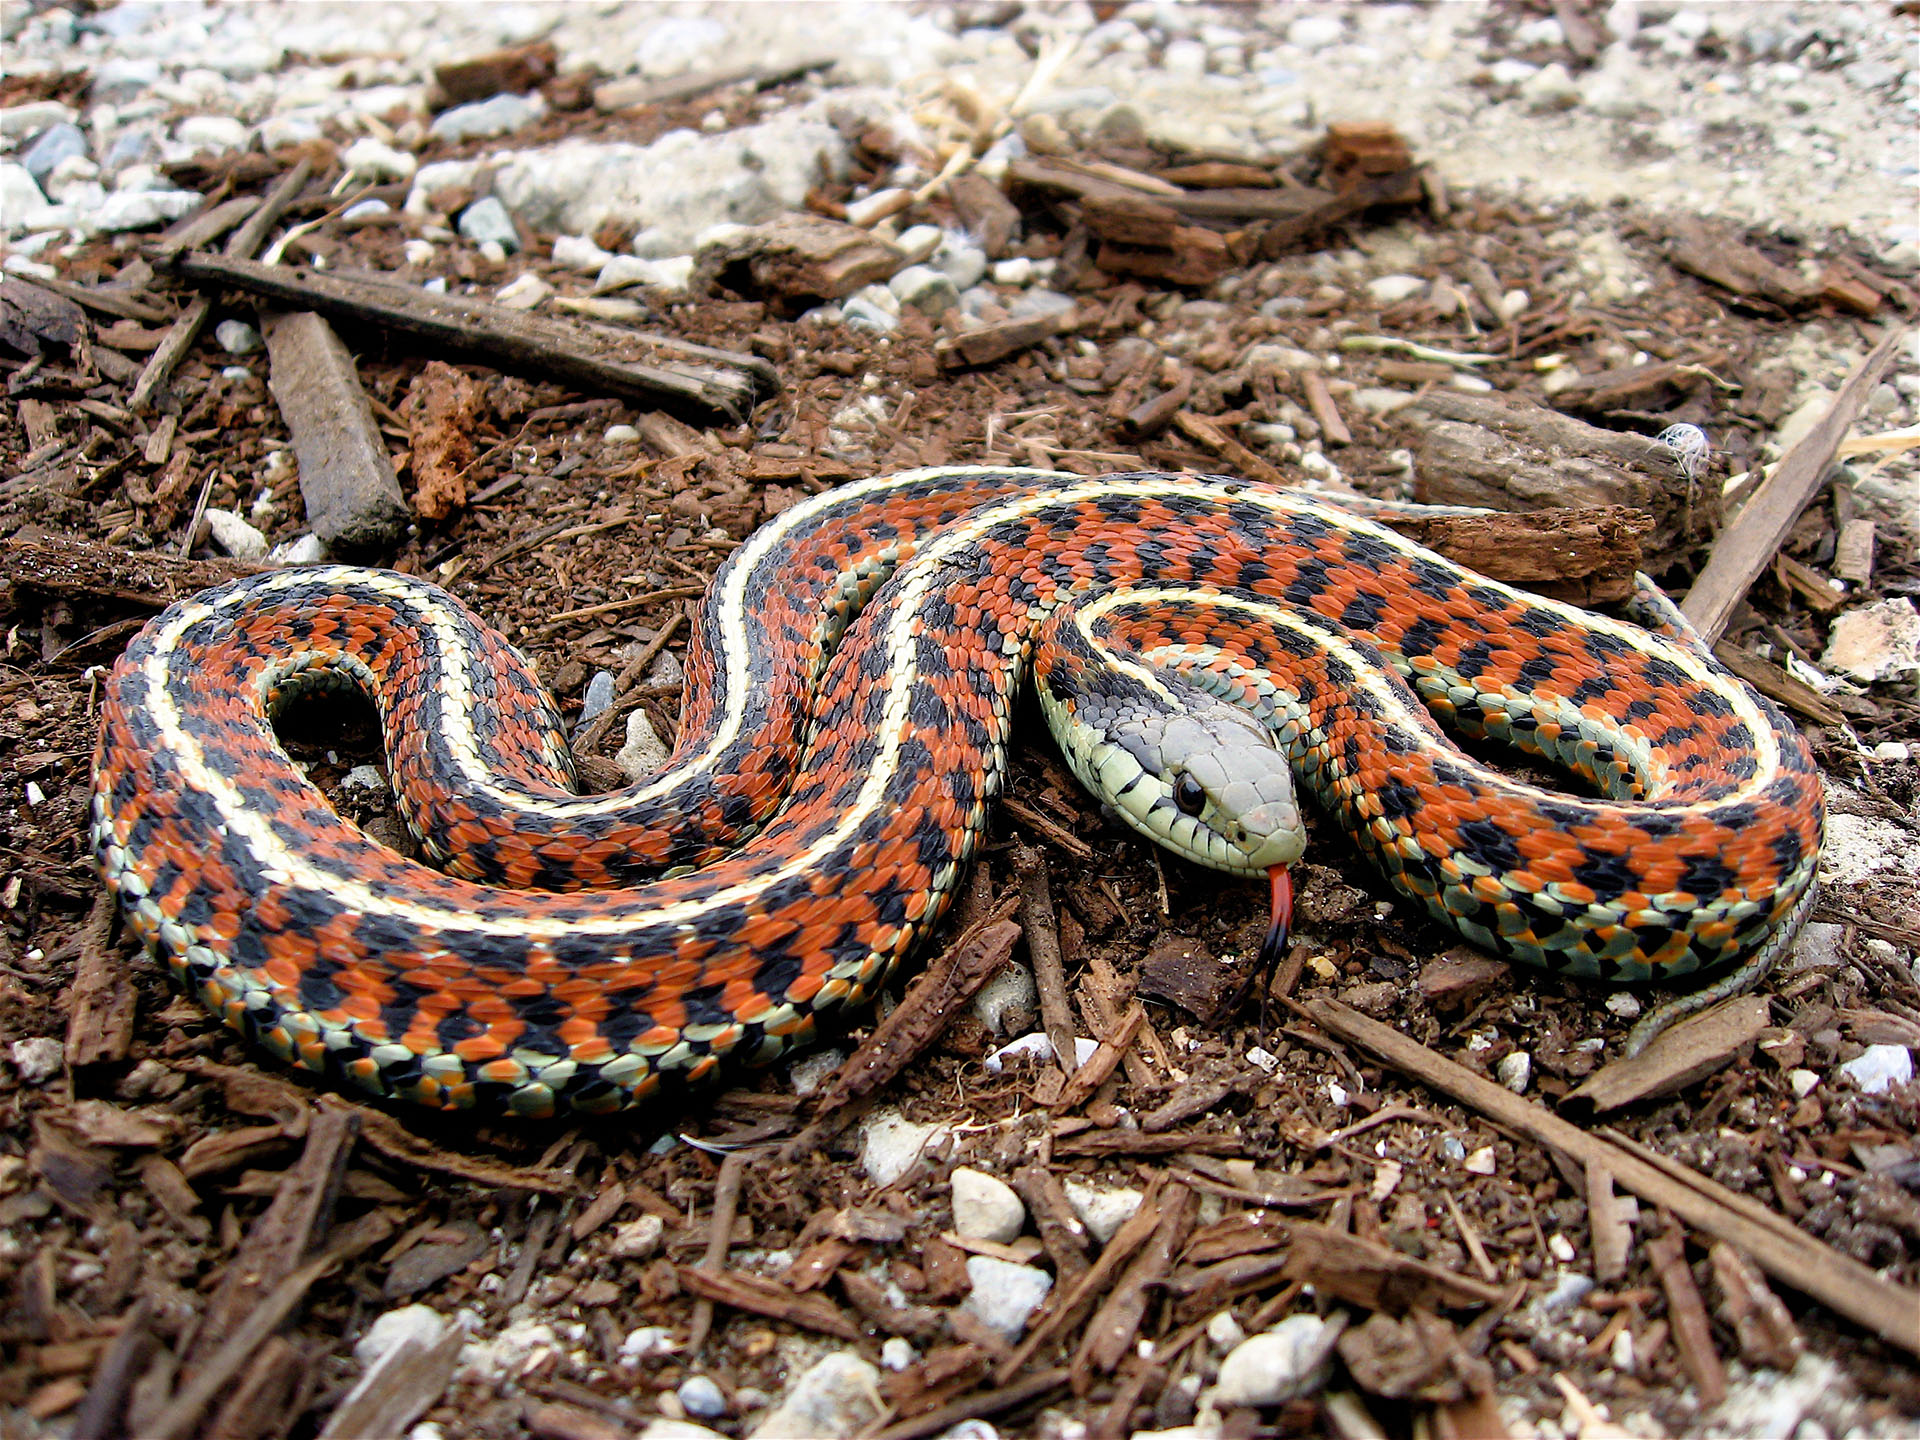 Thamnophis elegans, une couleuvre inoffensive